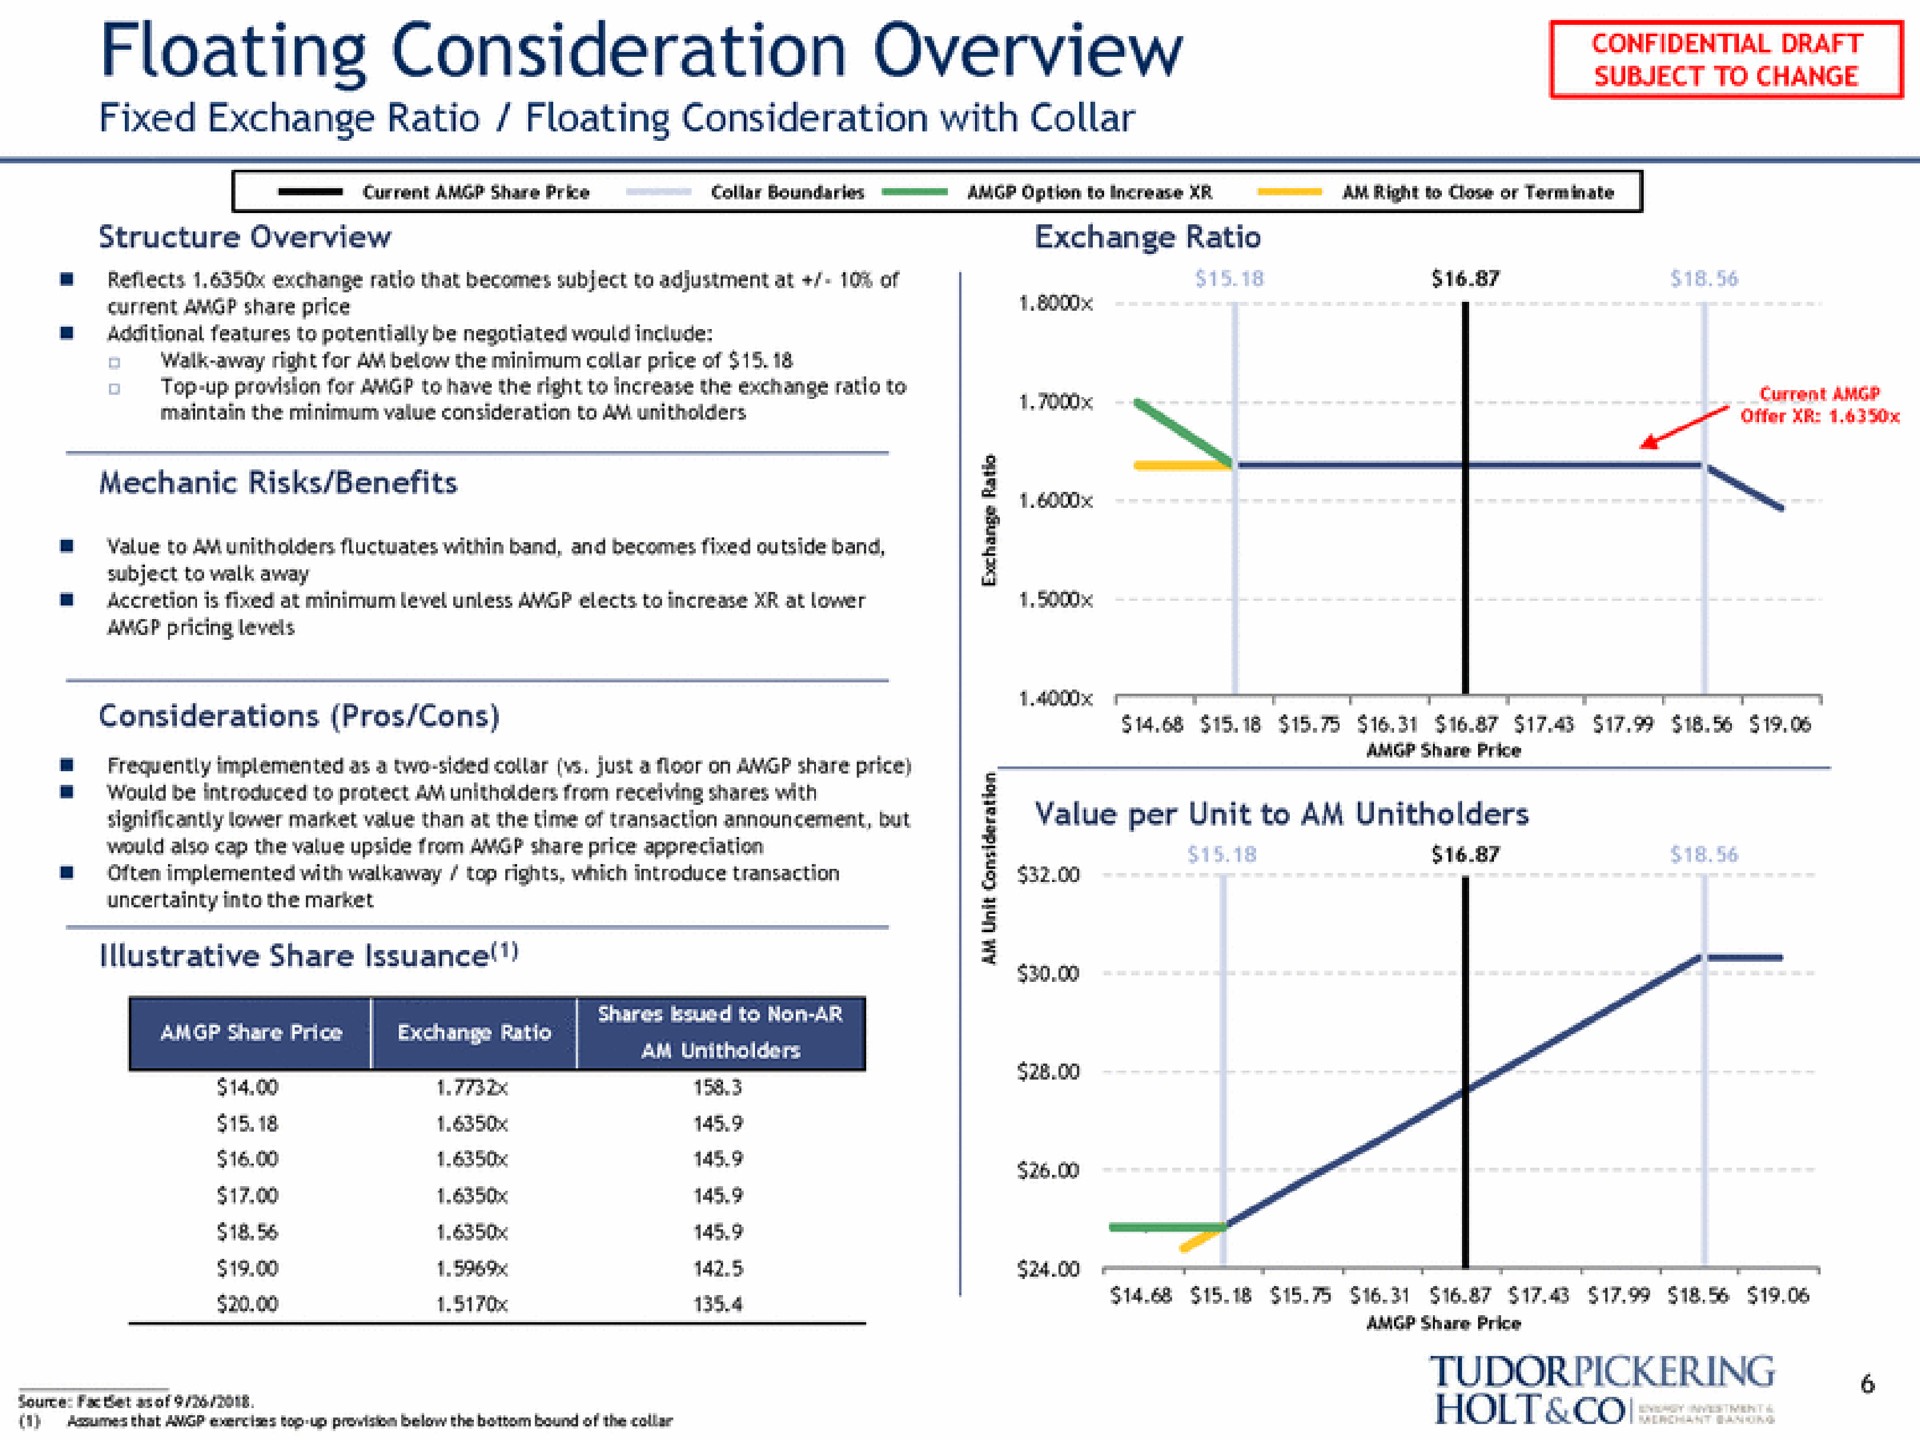 floating consideration overview fixed exchange ratio floating consideration with collar | Tudor, Pickering, Holt & Co